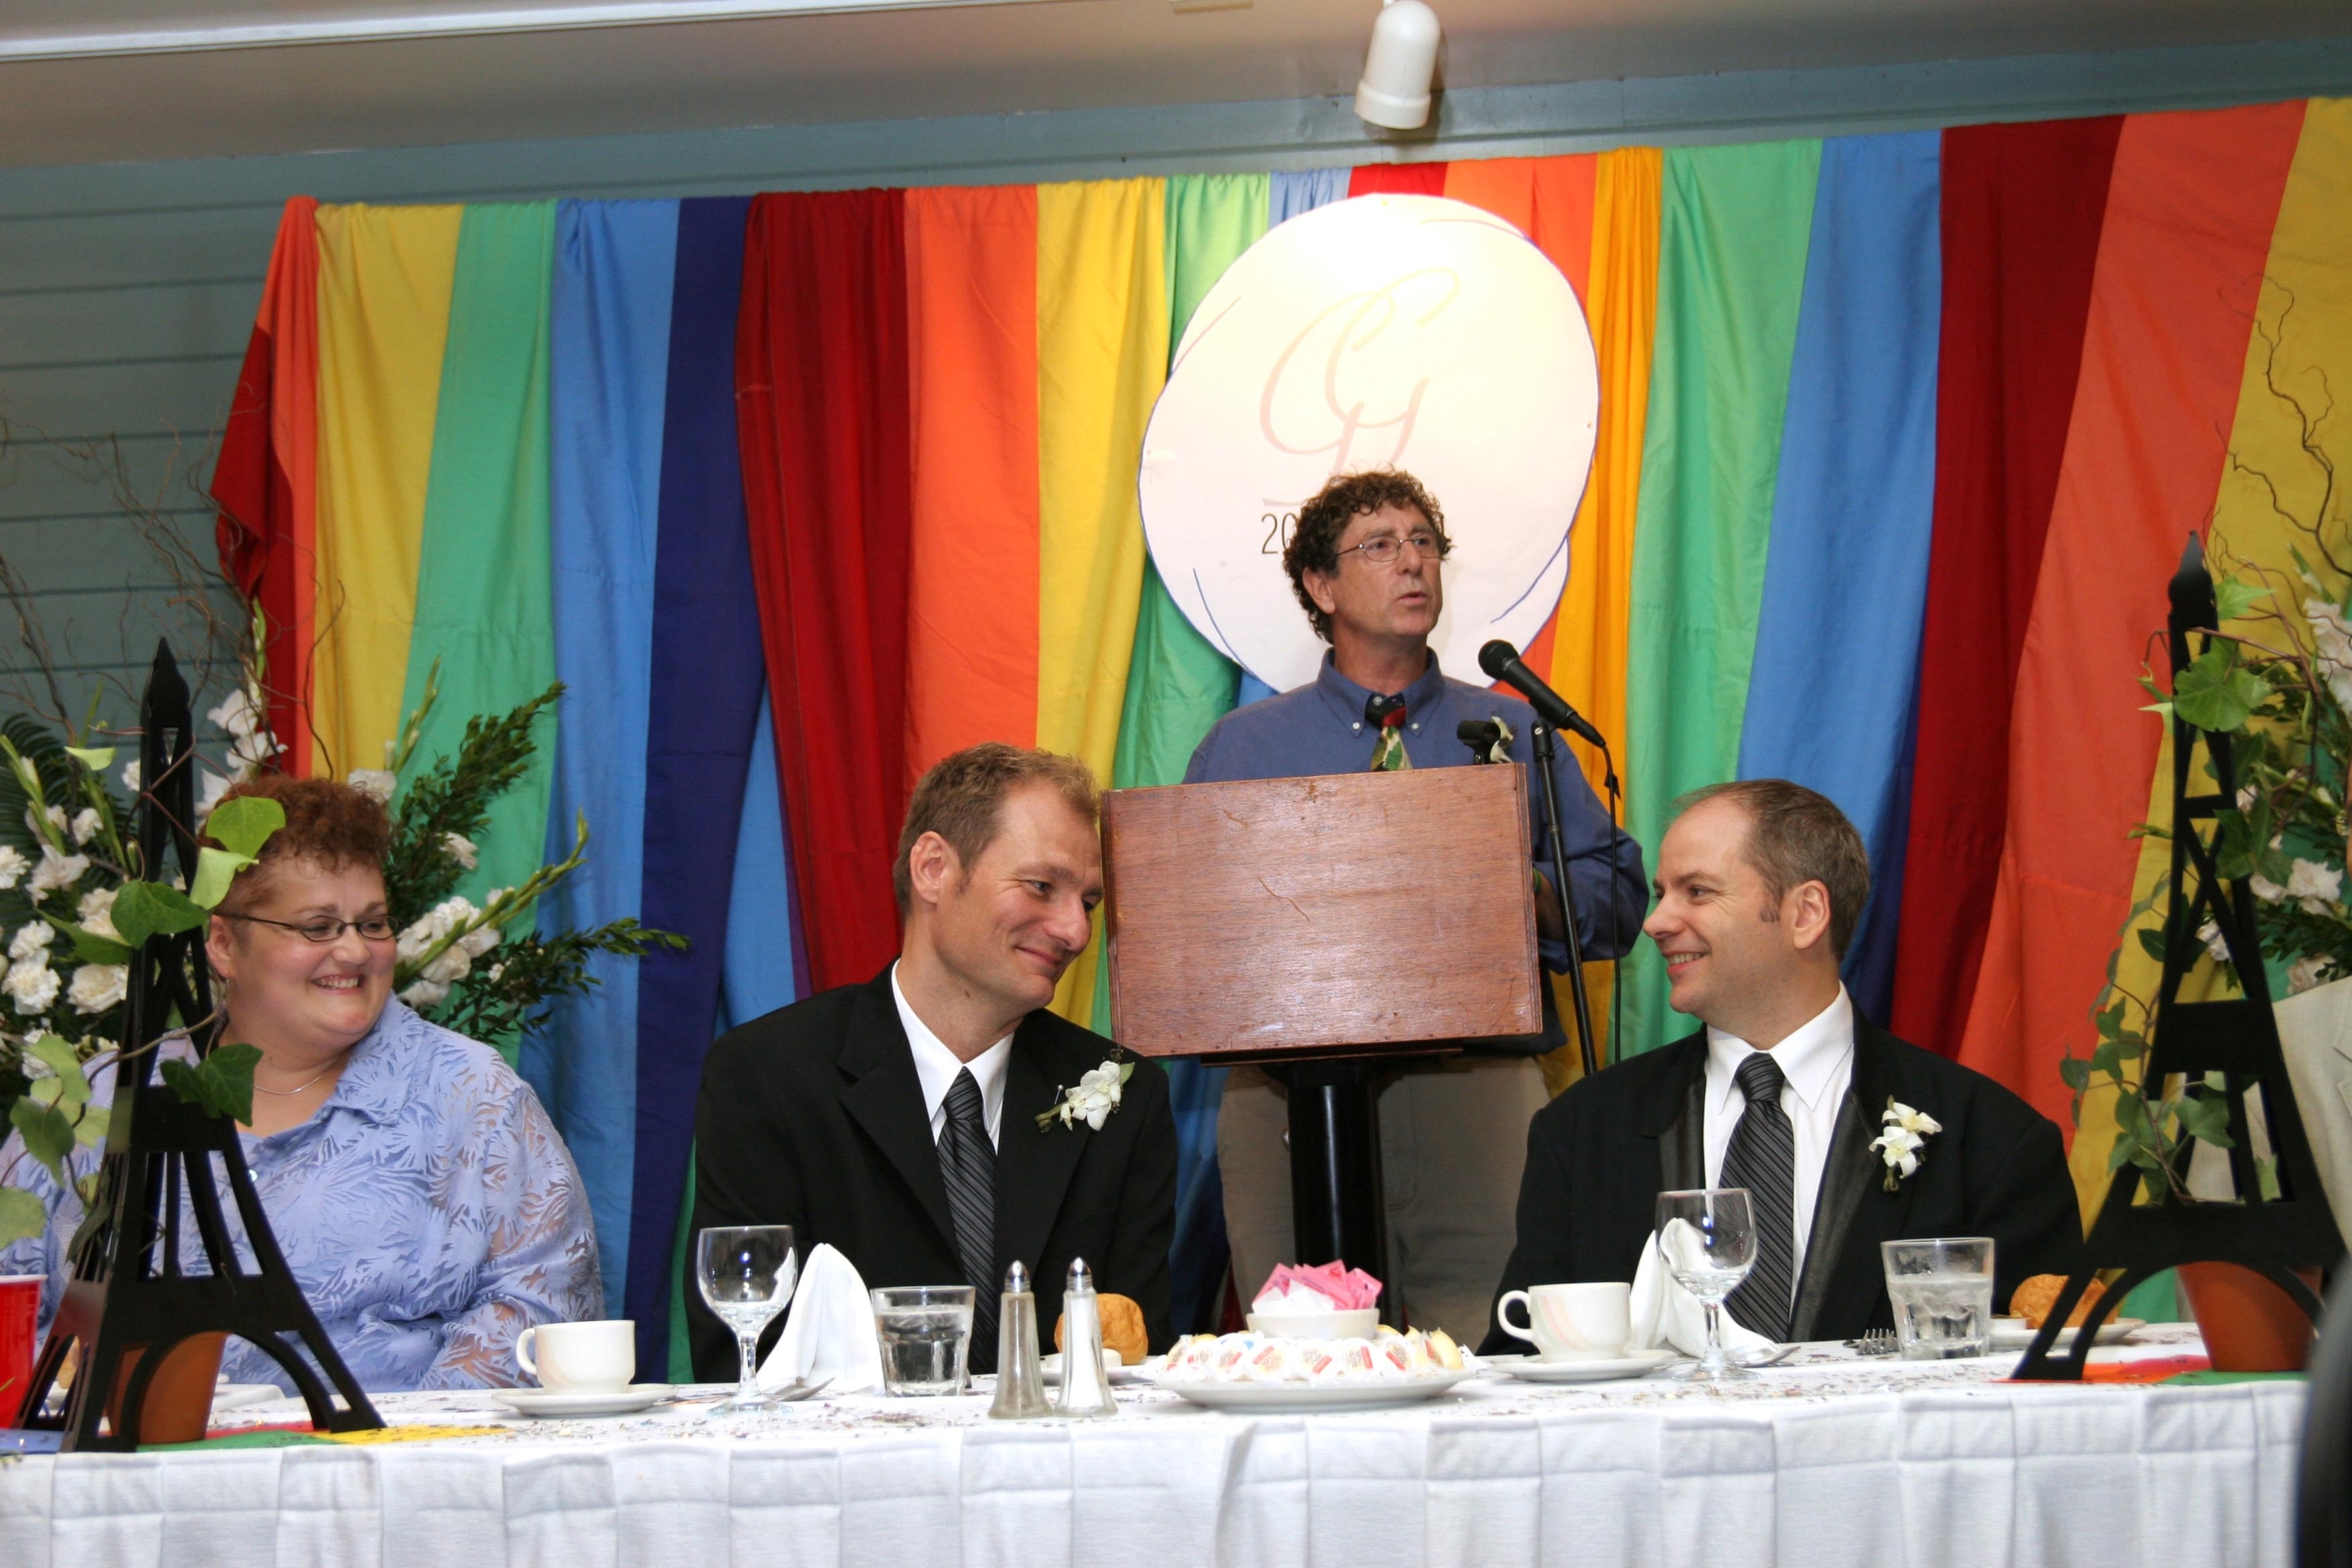 Two men sit at a head table, a man speaks at a podium behind them in front of a rainbow backdrop